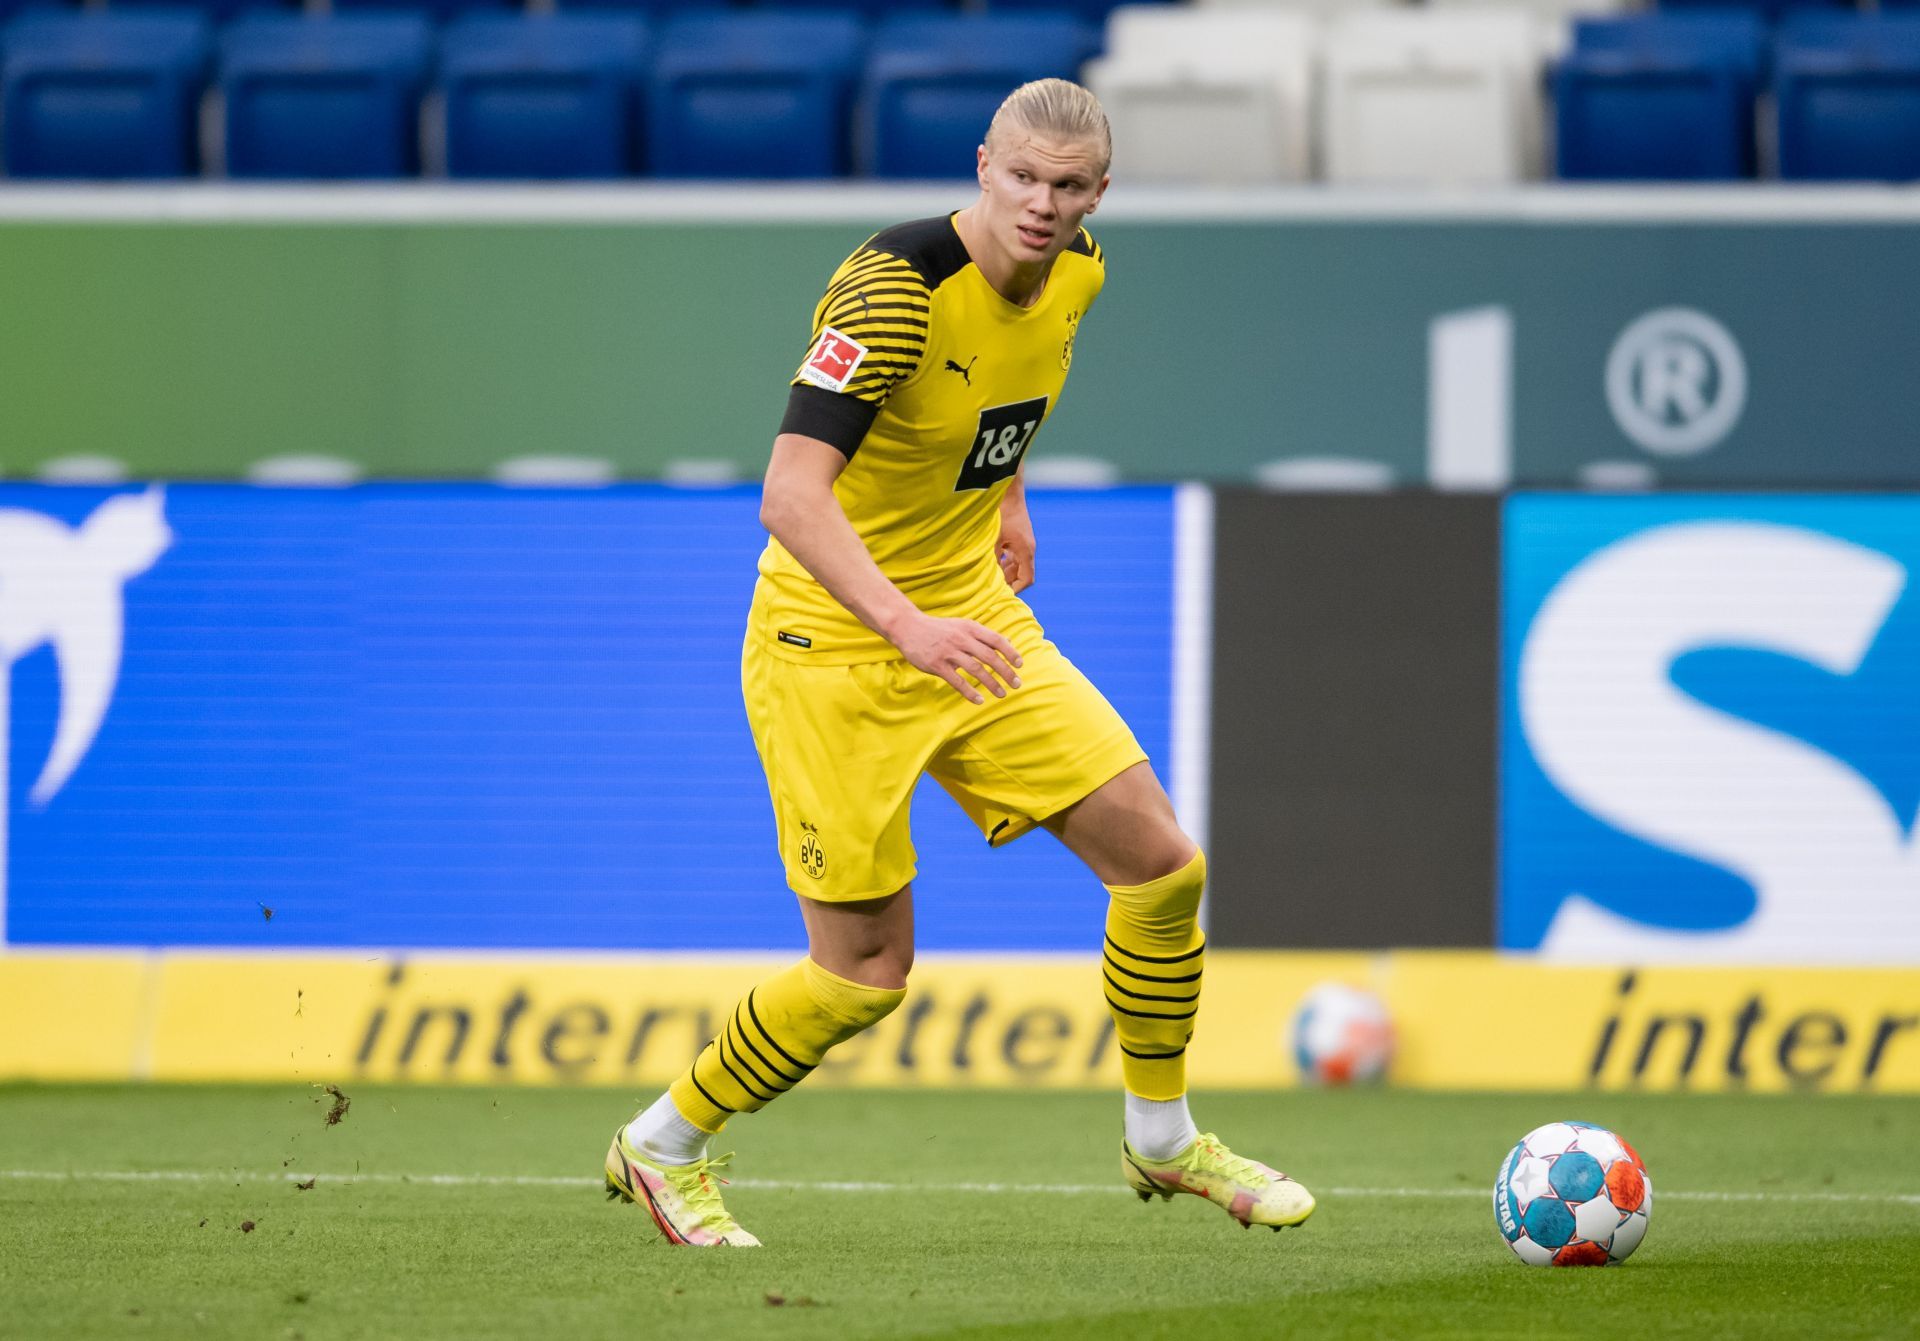 Real Madrid have received a boost in their quest to sign Erling Haaland.